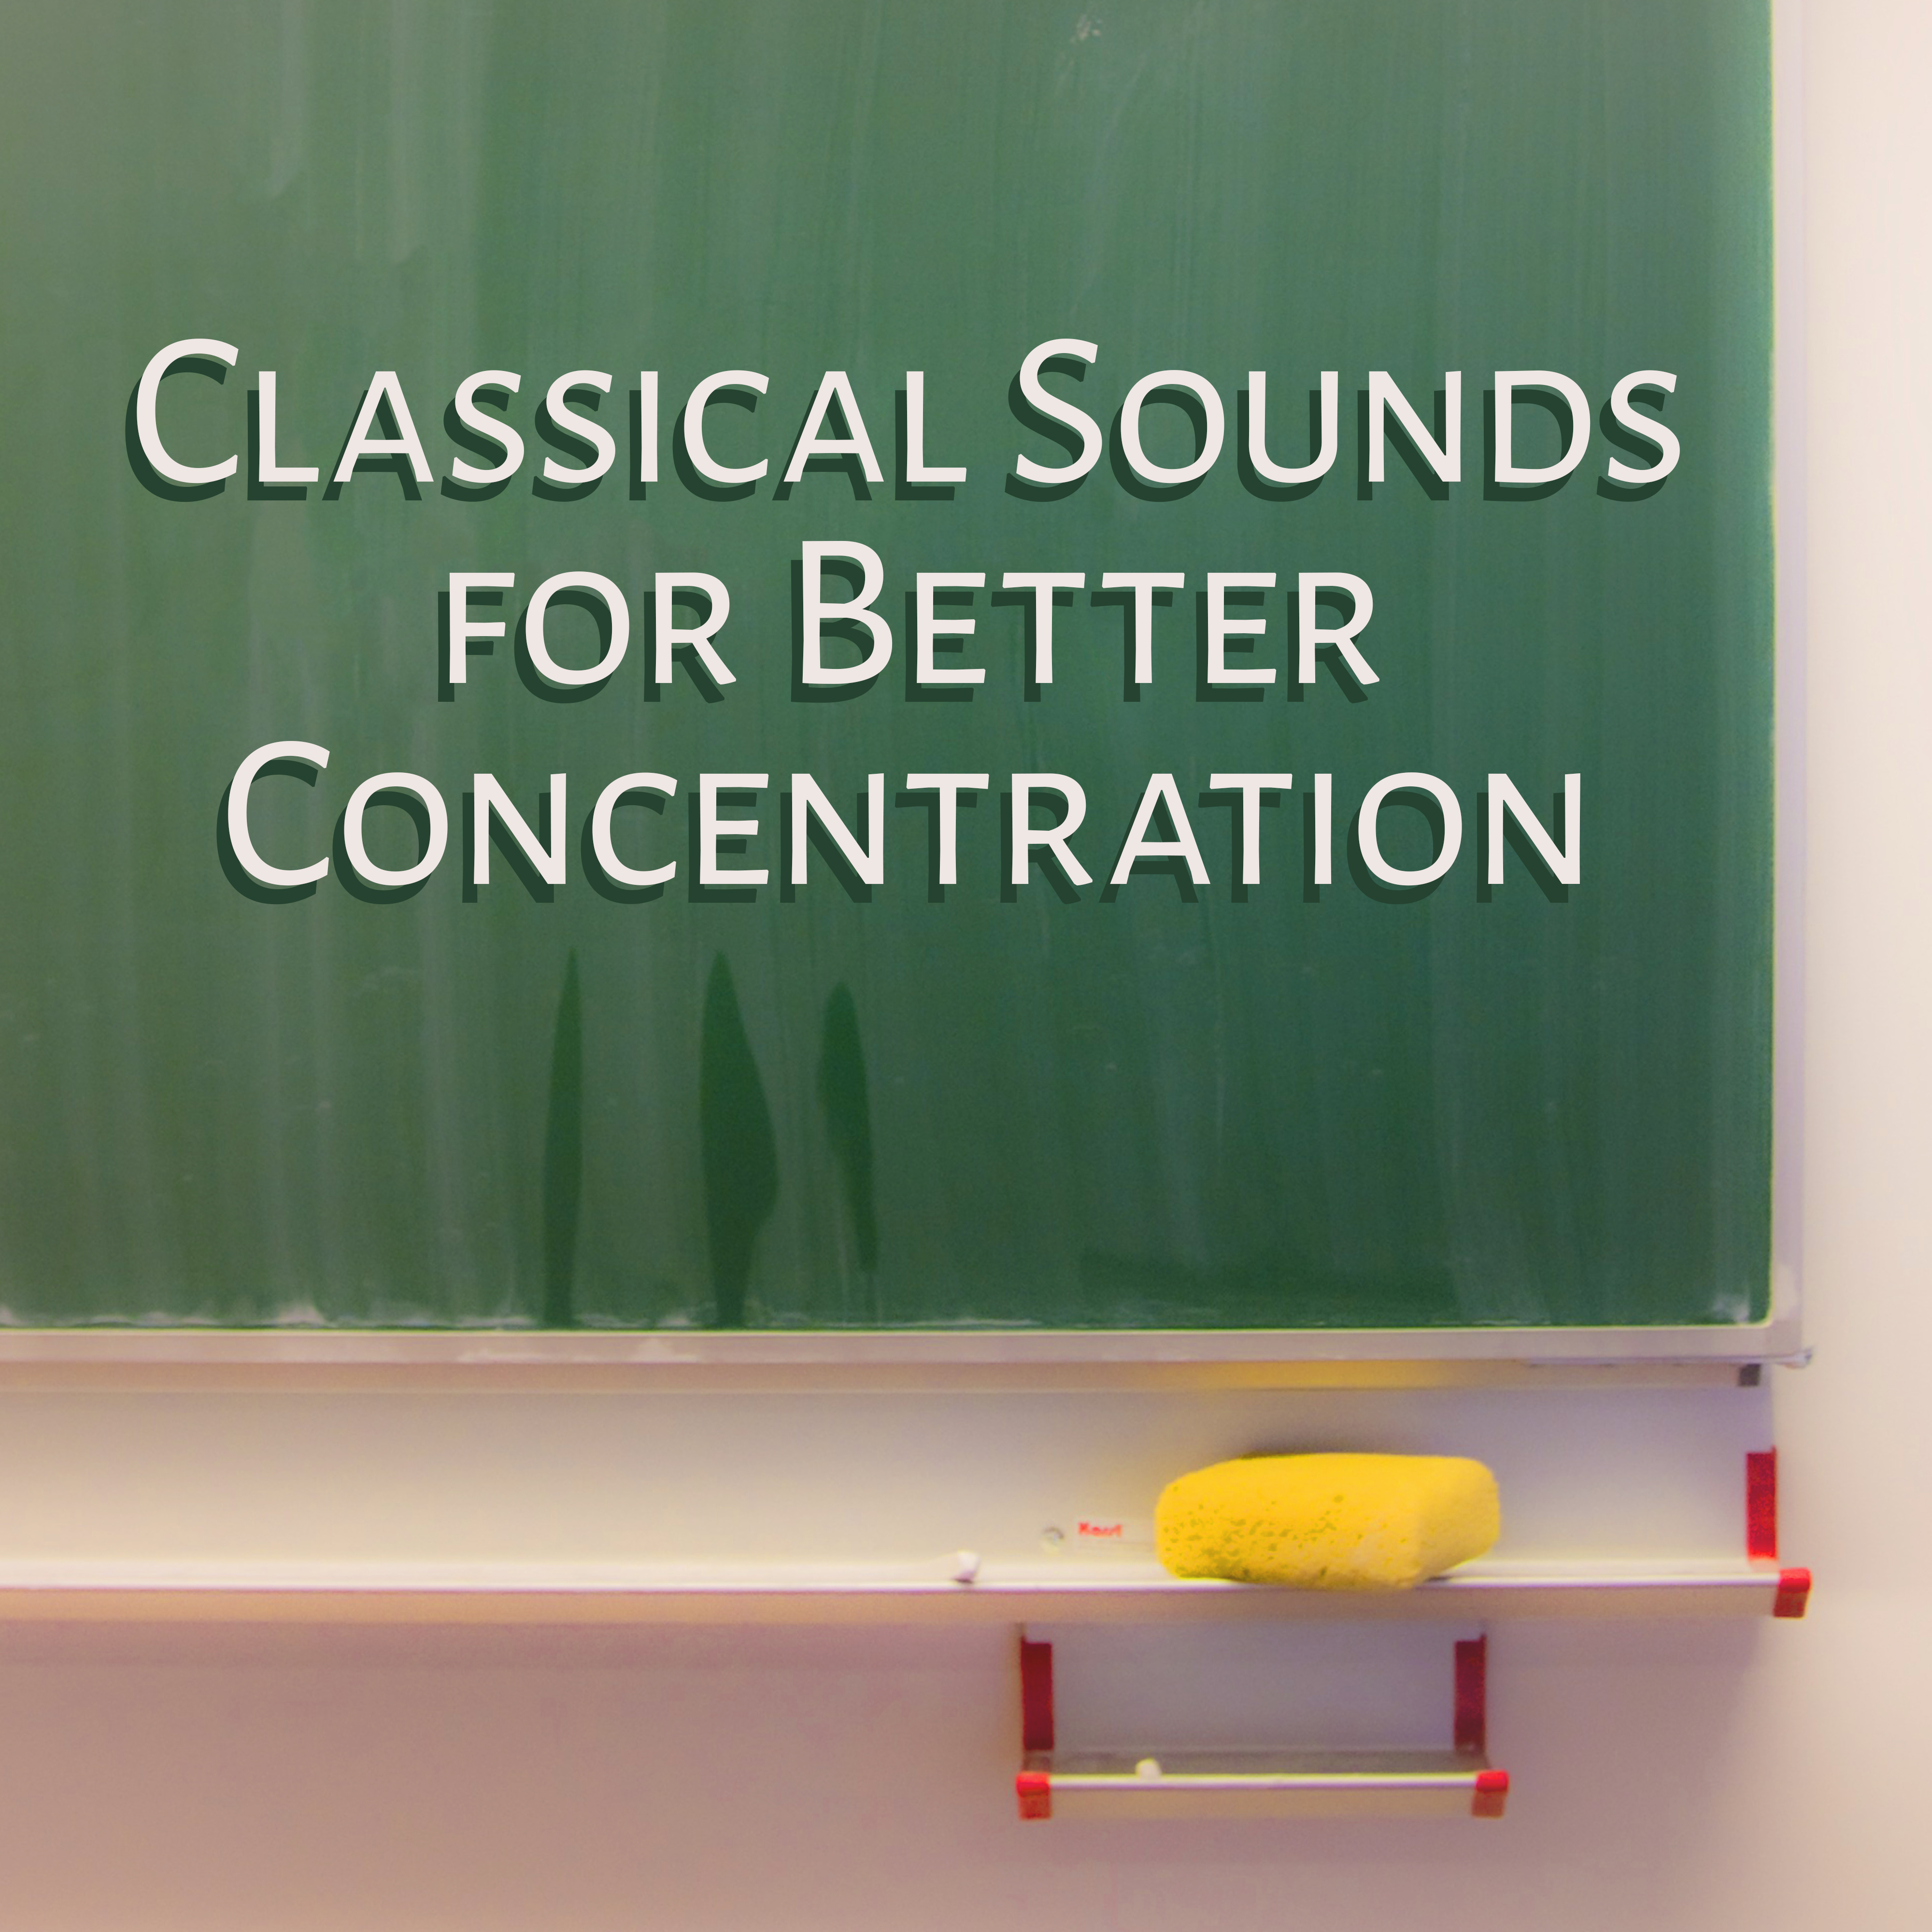 Classical Sounds for Better Concentration  Soothing Classics Music, Rest with Beautiful Melodies, Sounds to Focus, Study Time